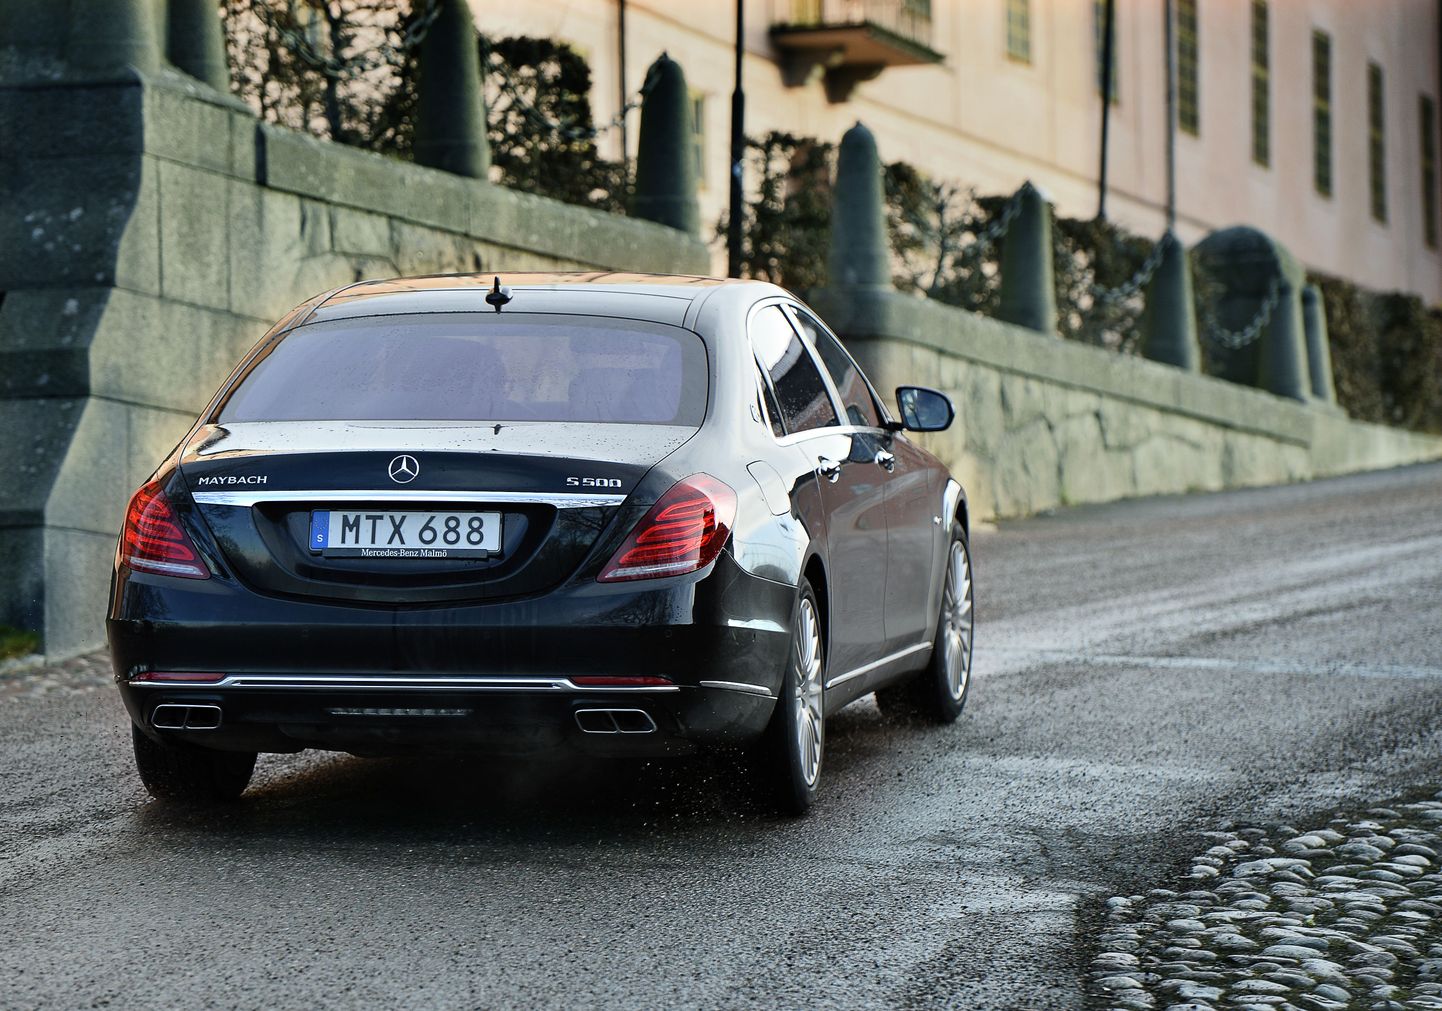 MERCEDES MAYBACH S500.